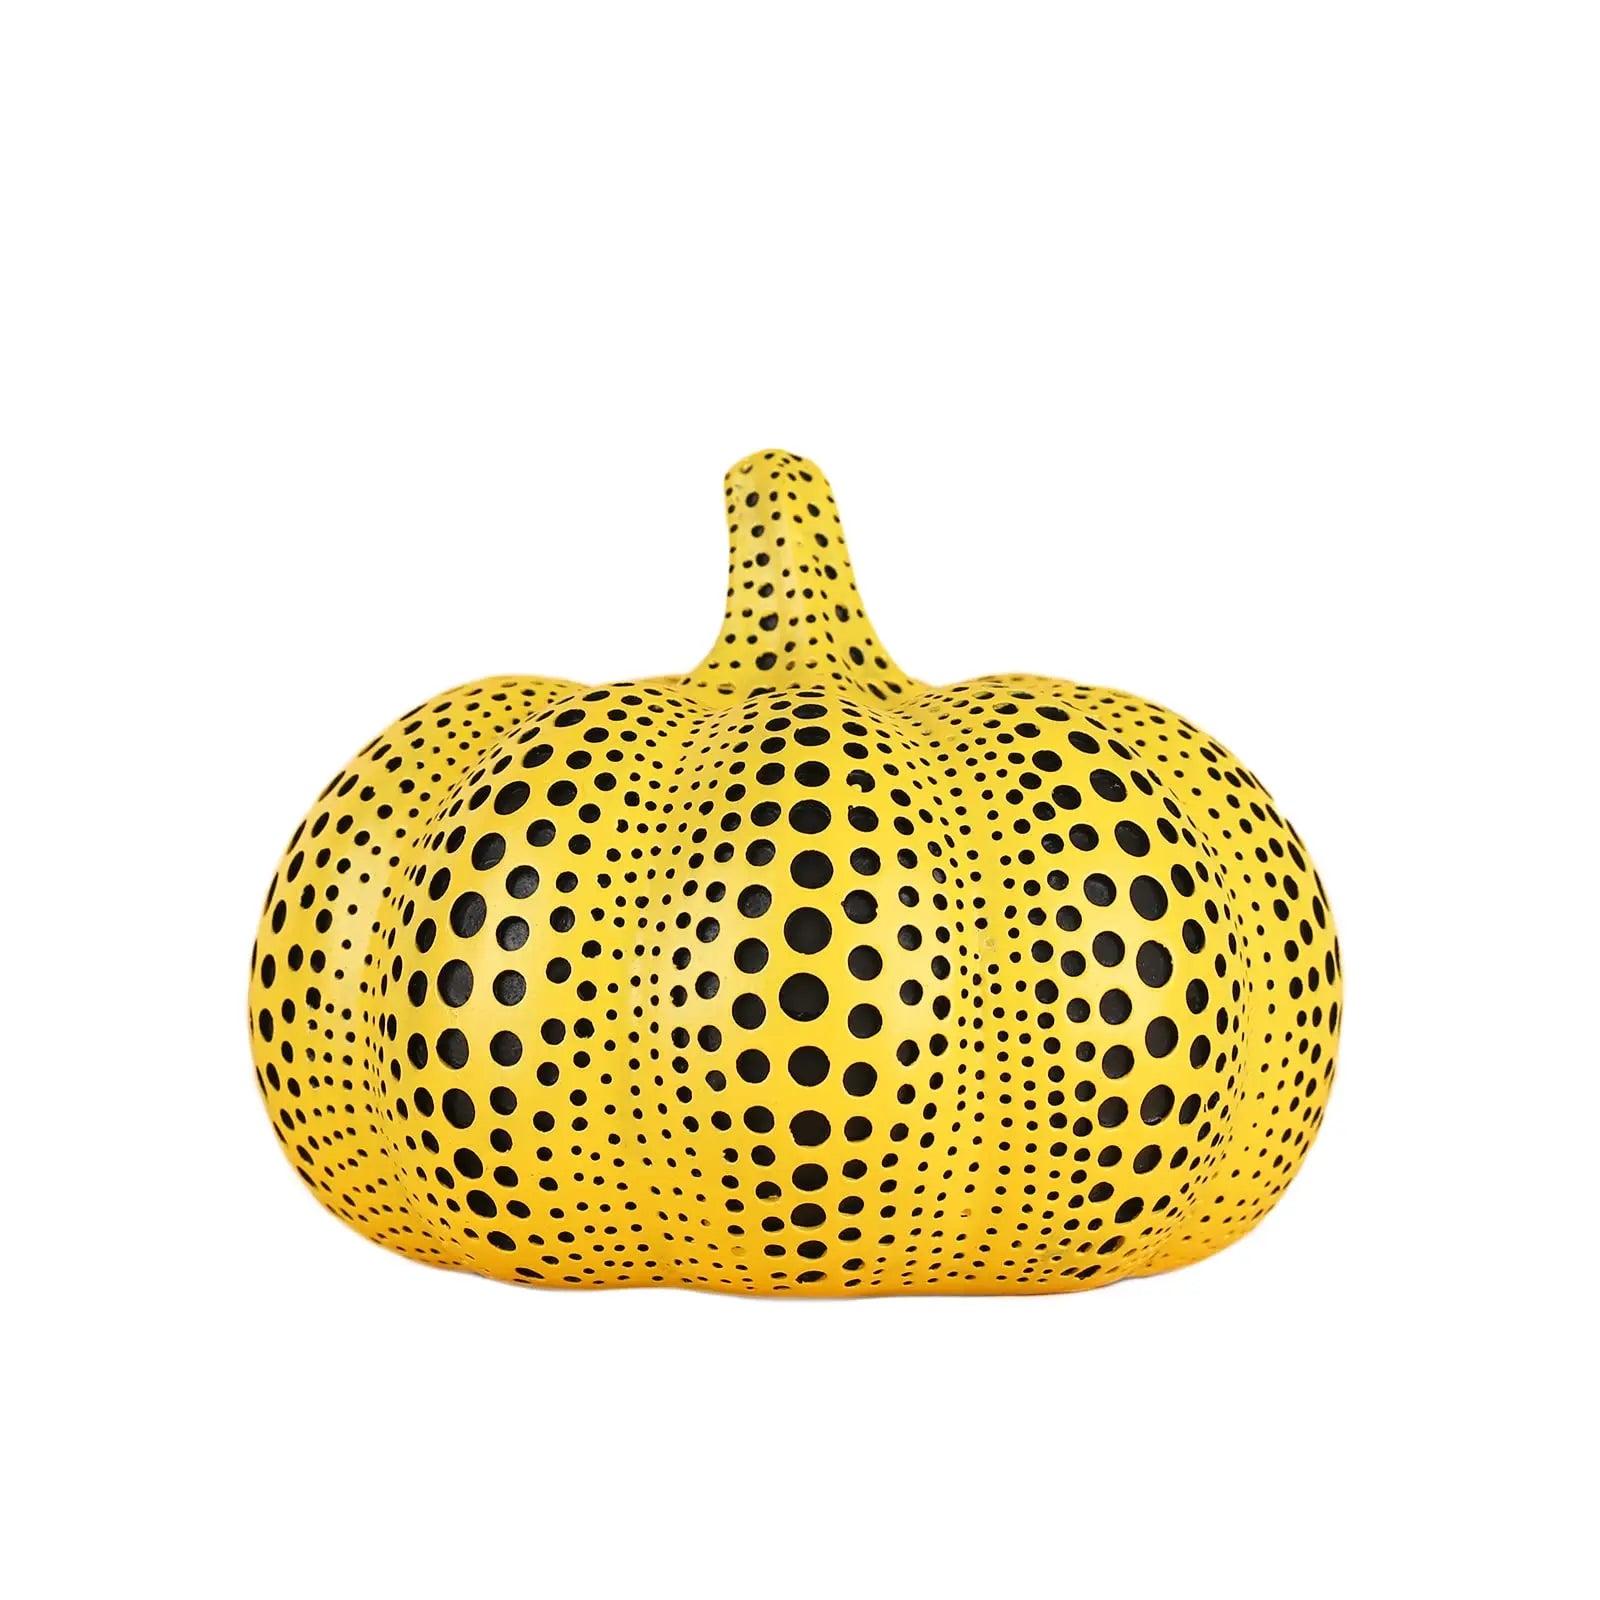 Pumpkin Statue for Home Decor Accents Living Room Office Bedroom Kitchen Laundry House Apartment Dorm Bar Decoration